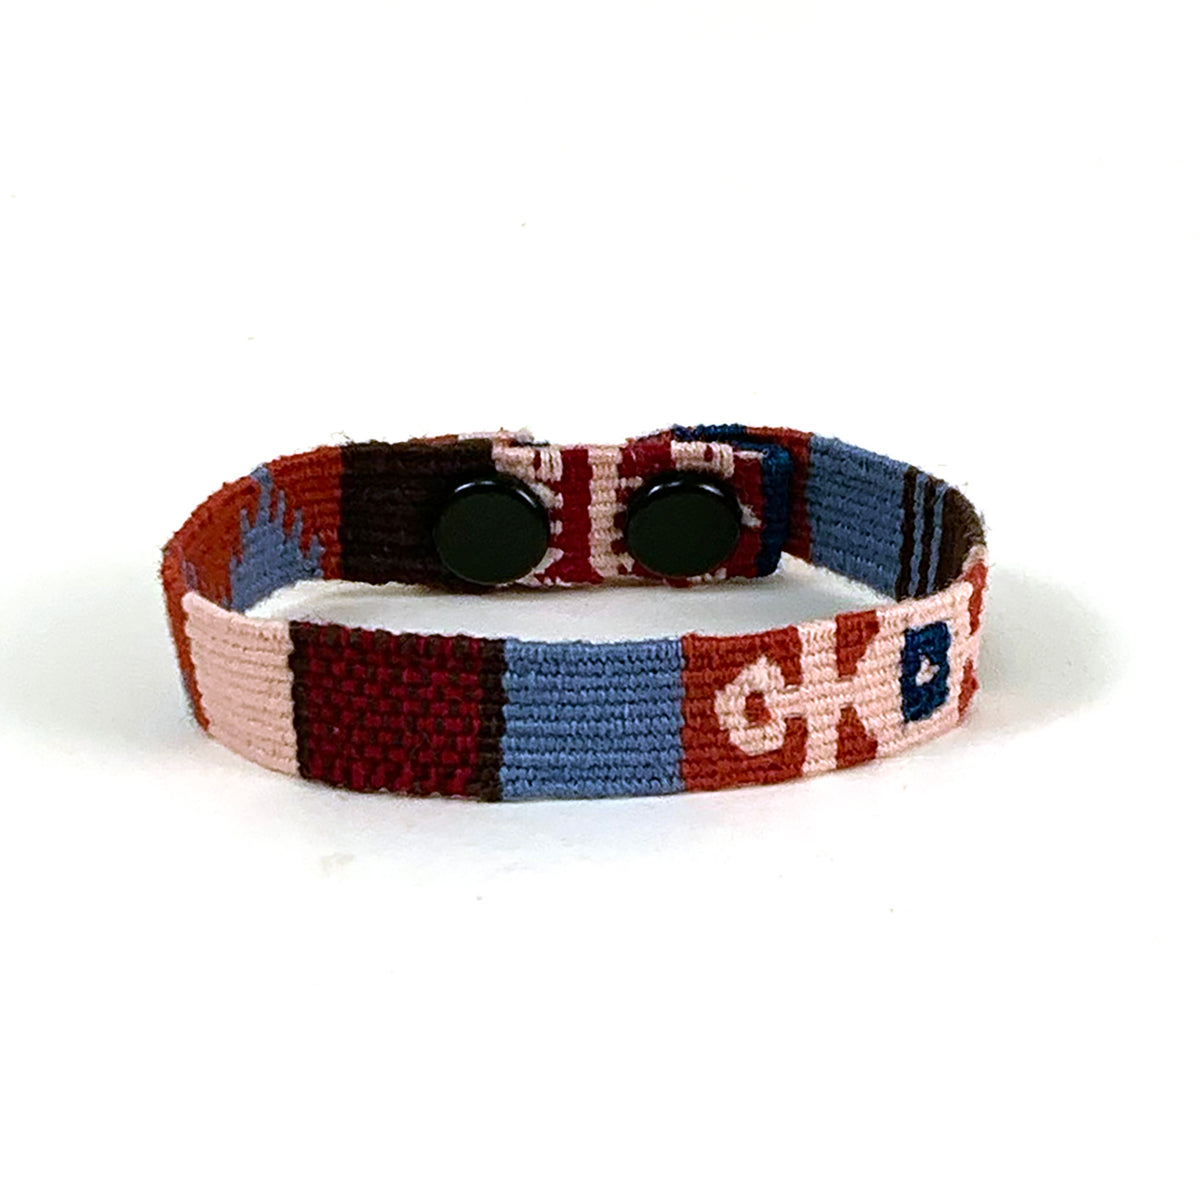 handwoven friendship bracelet with snaps